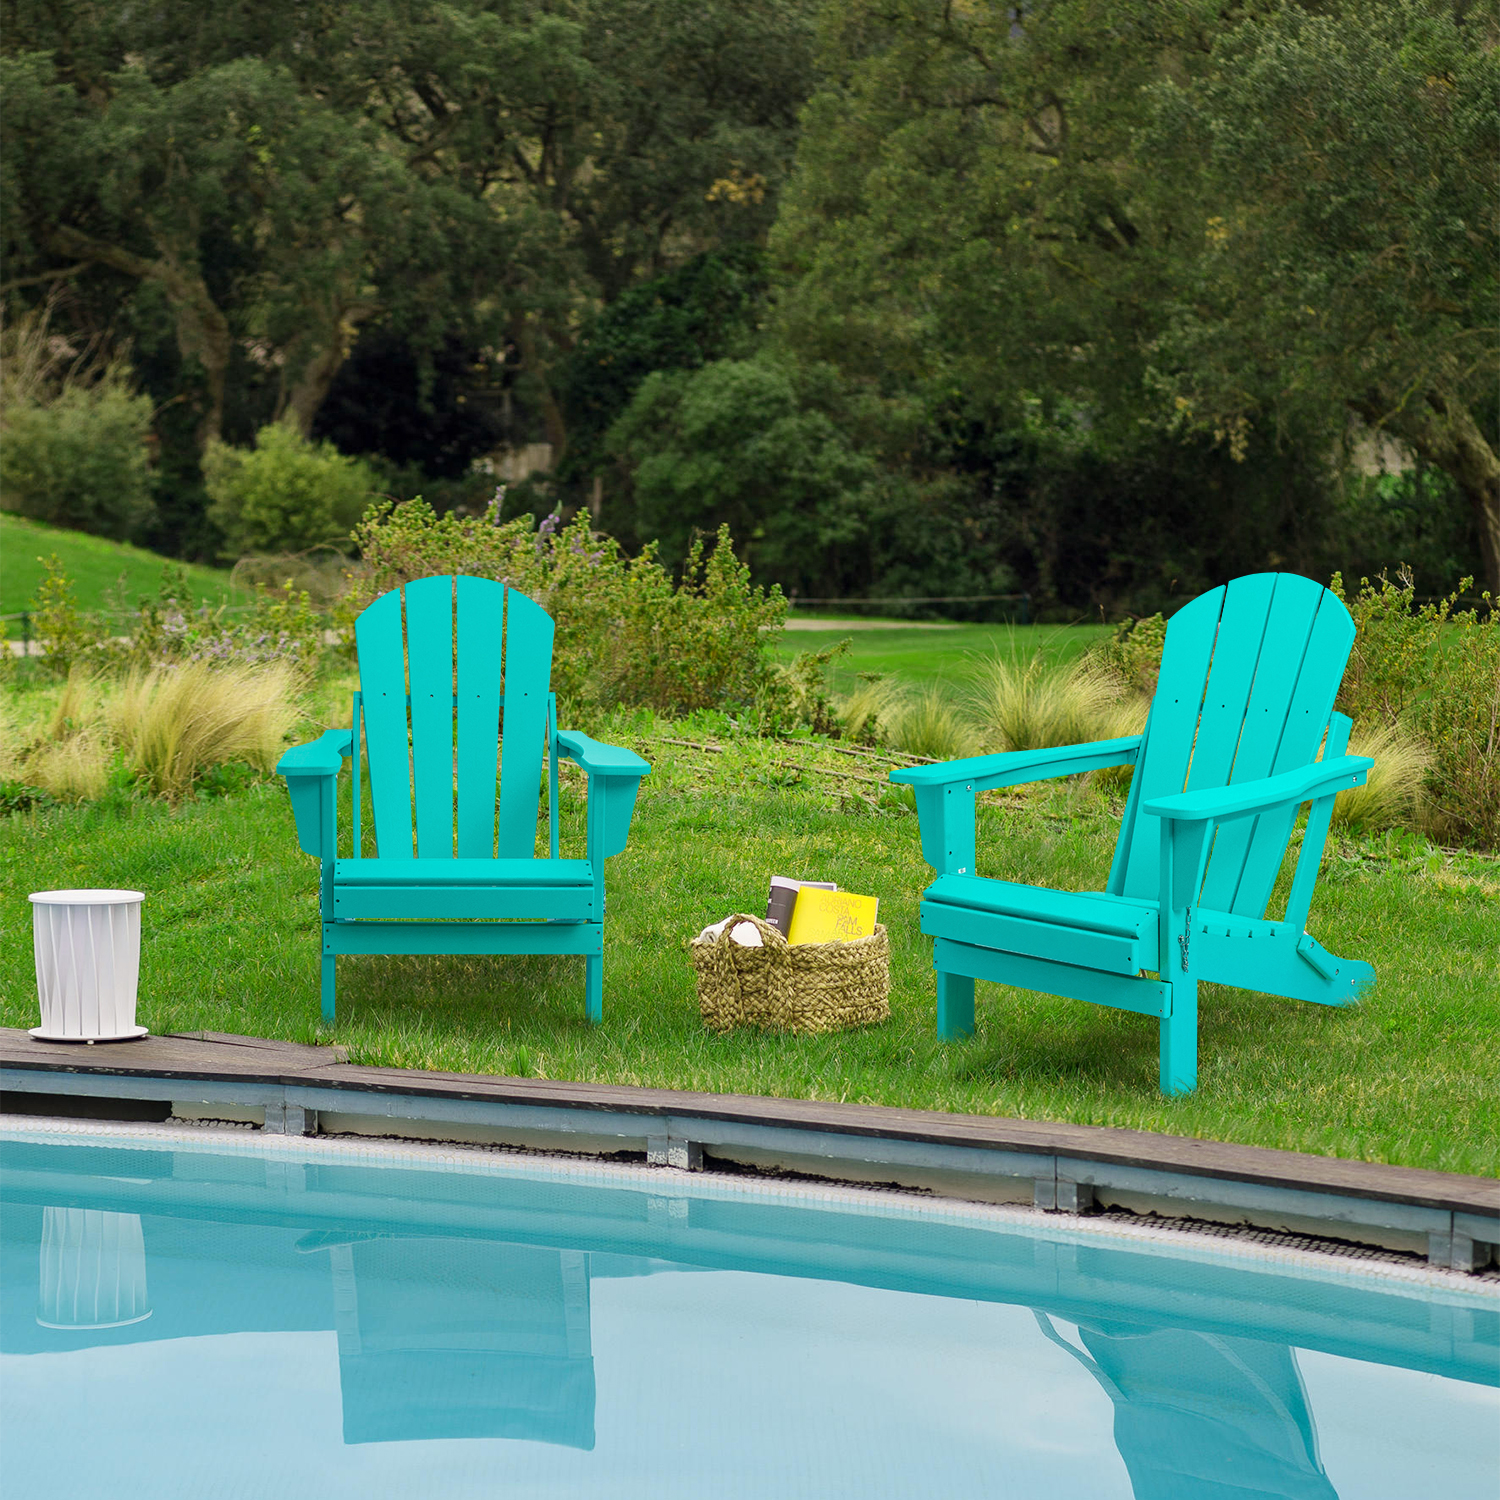 Devoko Folding Adirondack Chair Set of 2 HDPE Weather Resistant Outdoor Lounge Chair, Turquoise - image 1 of 6